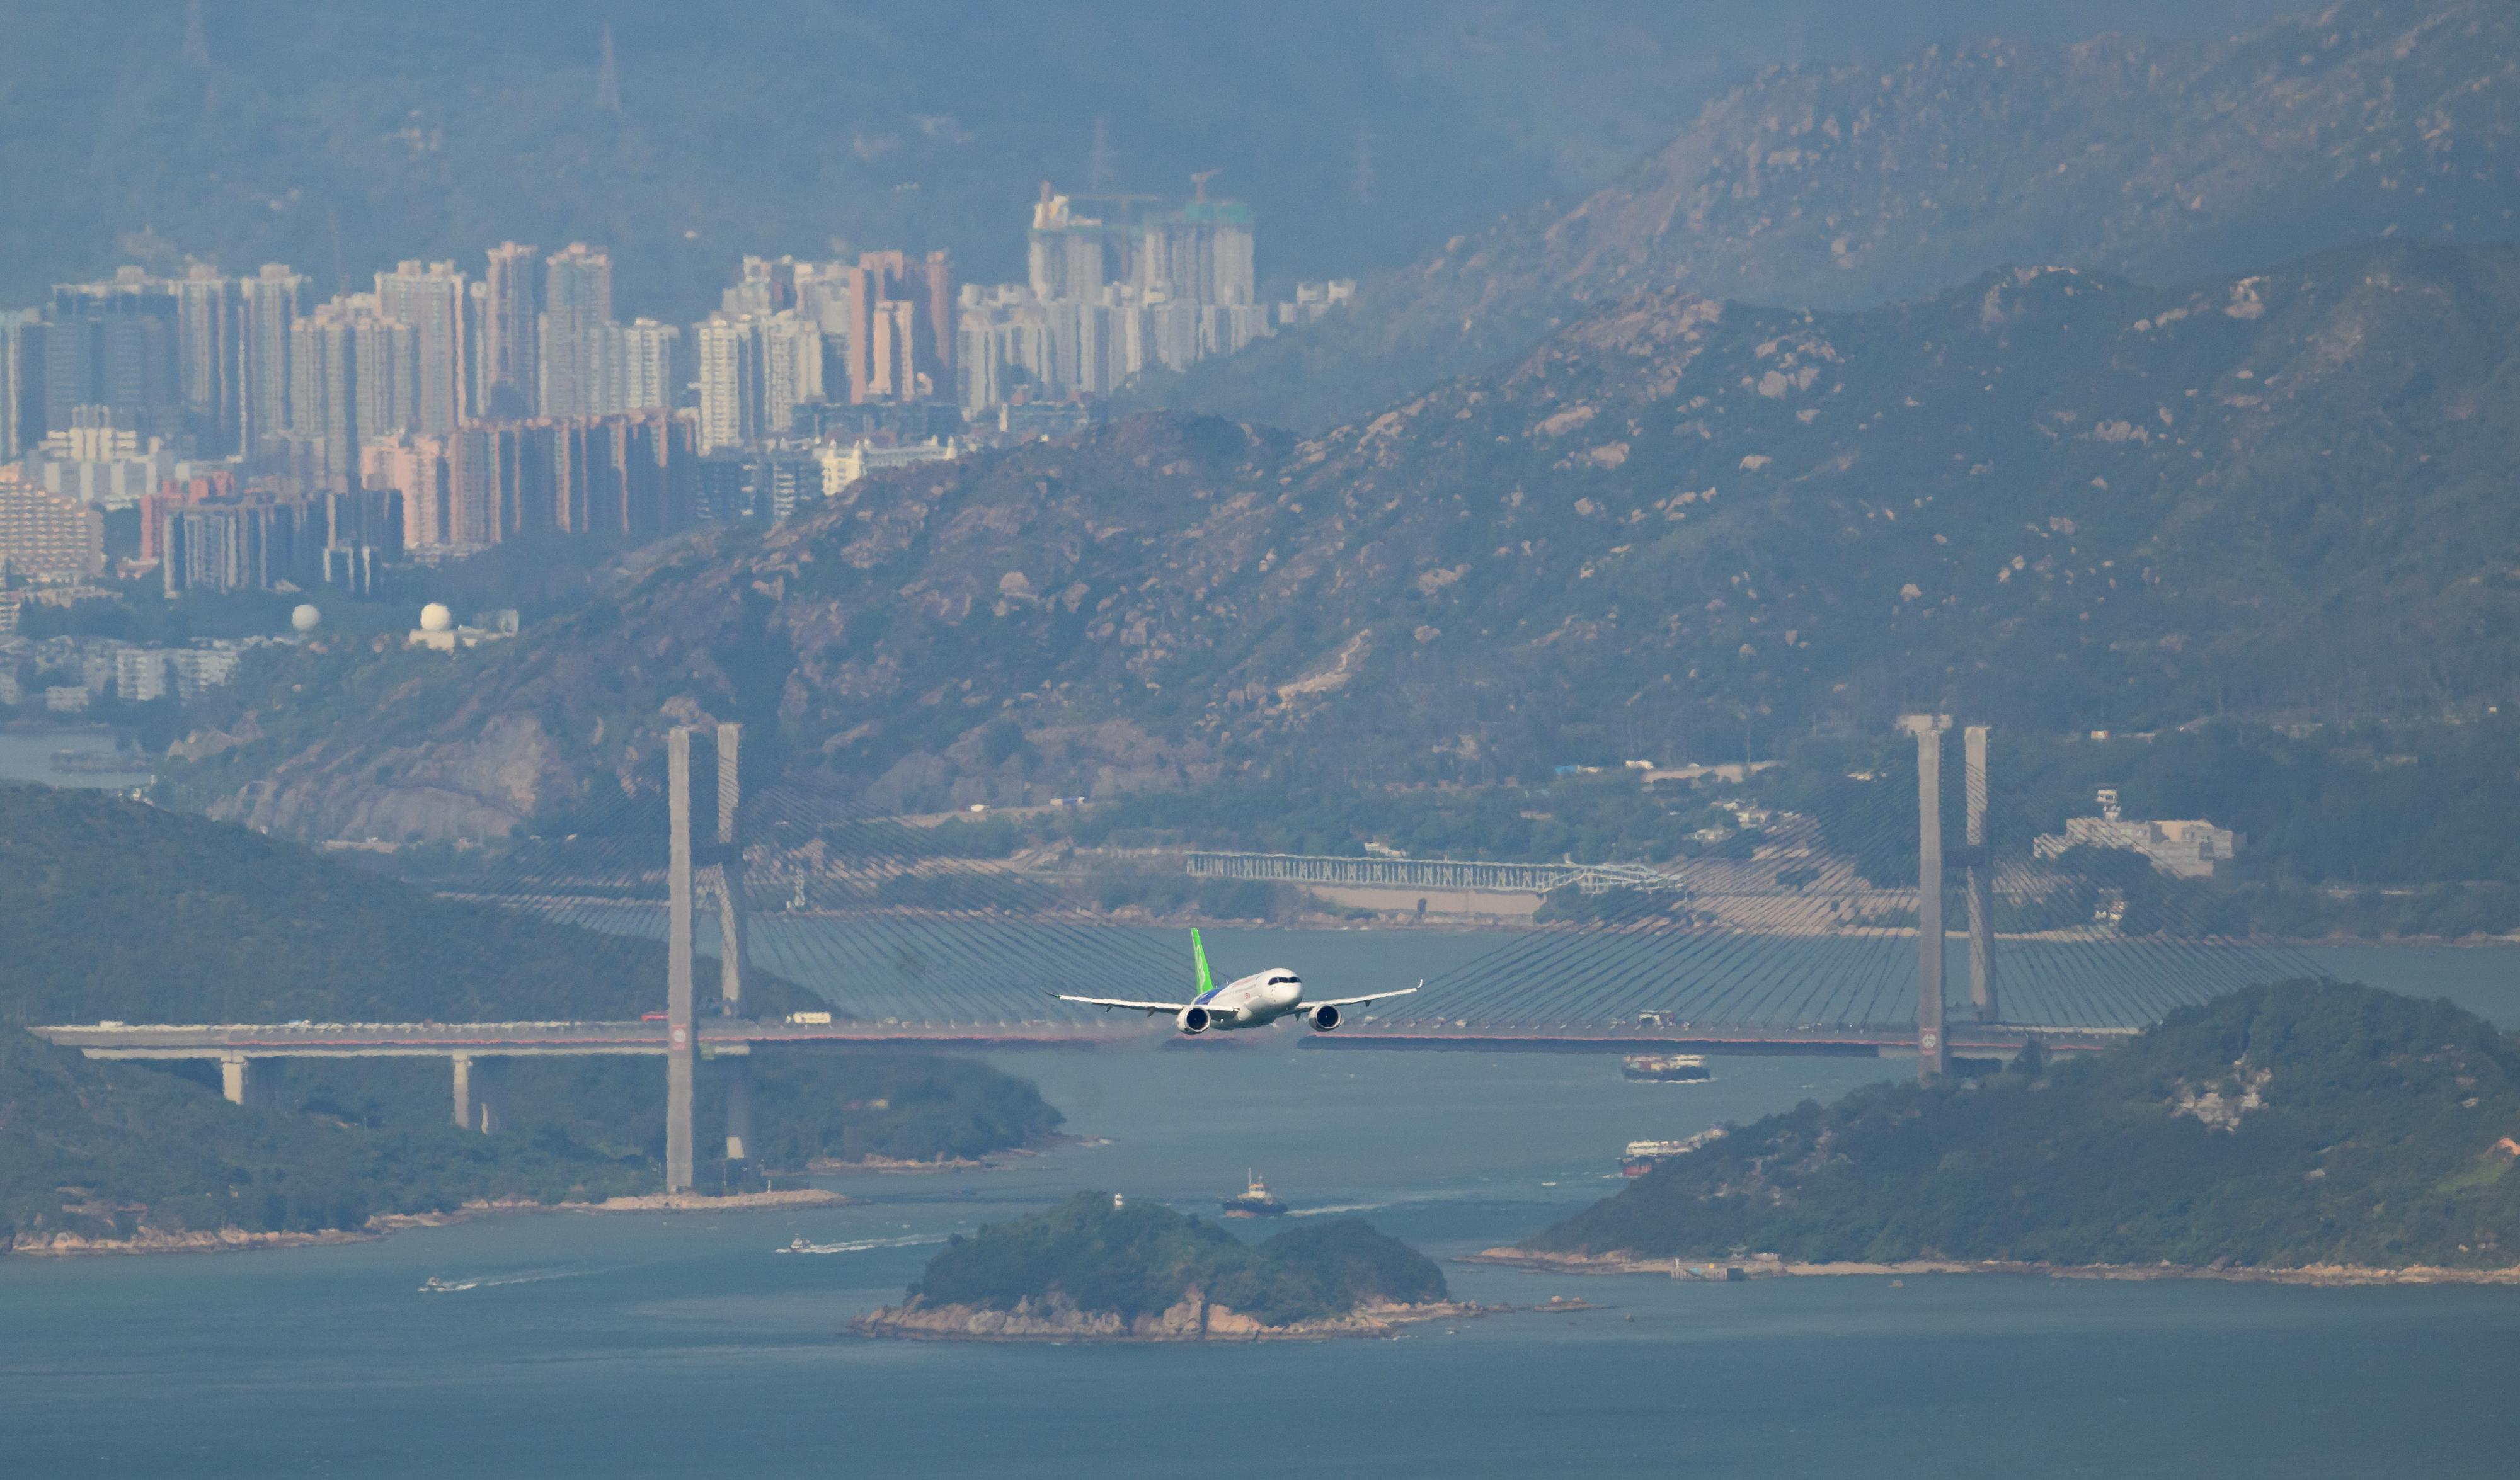 The flight demonstration of home-grown aircraft C919 concluded successfully this morning (December 16). Photo shows the C919 aircraft flying towards Victoria Harbour for flight demonstration from Hong Kong International Airport.